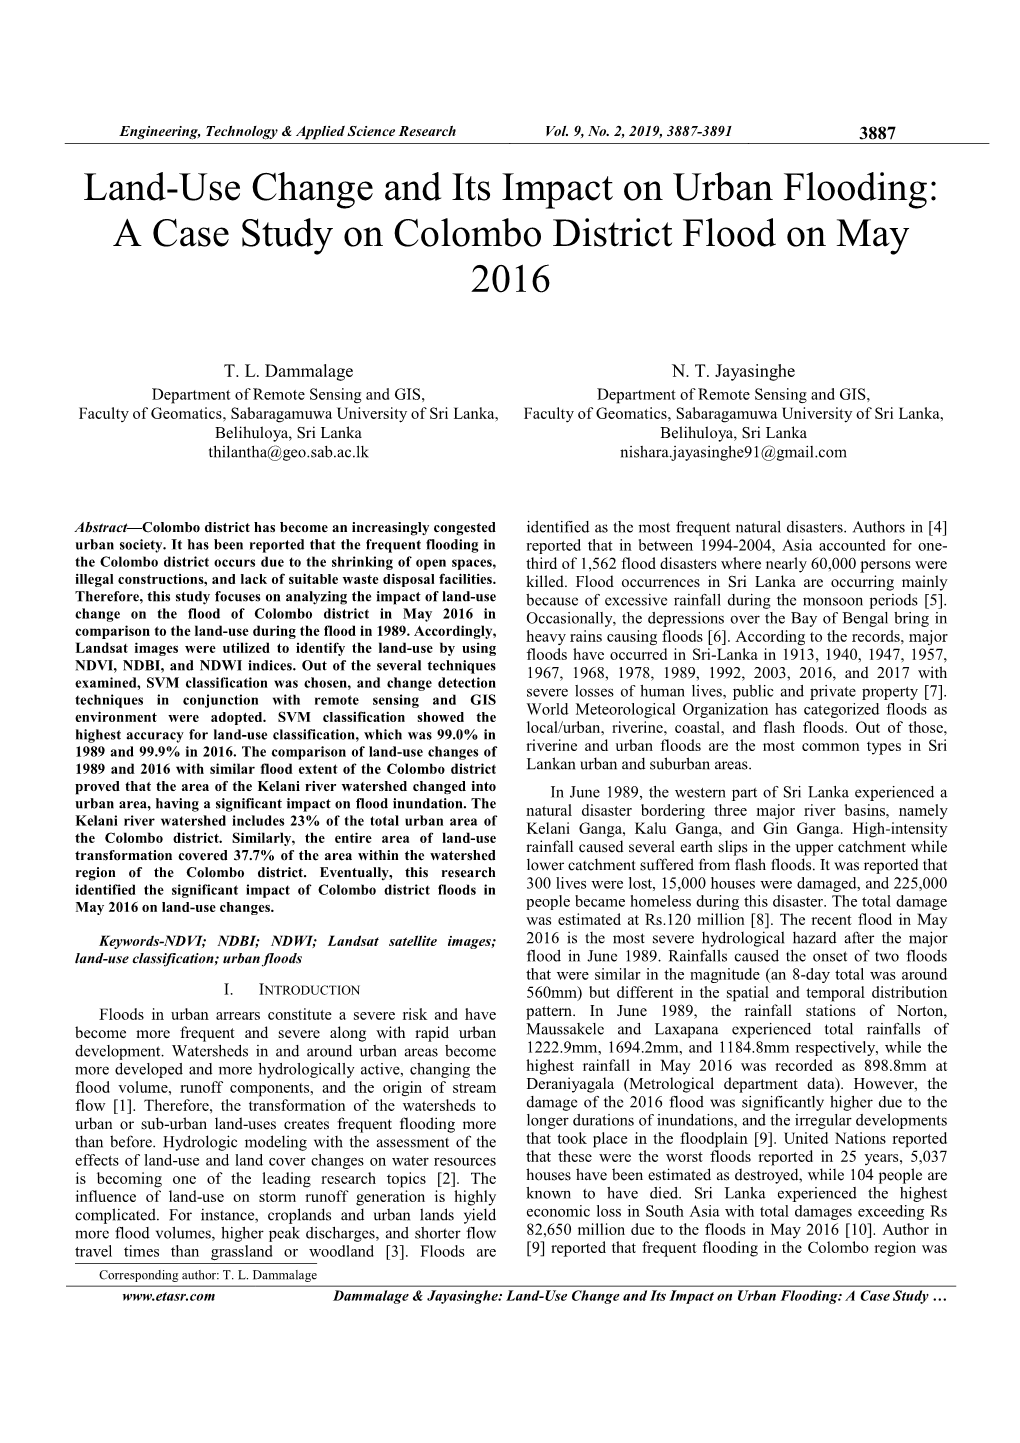 Land-Use Change and Its Impact on Urban Flooding: a Case Study on Colombo District Flood on May 2016